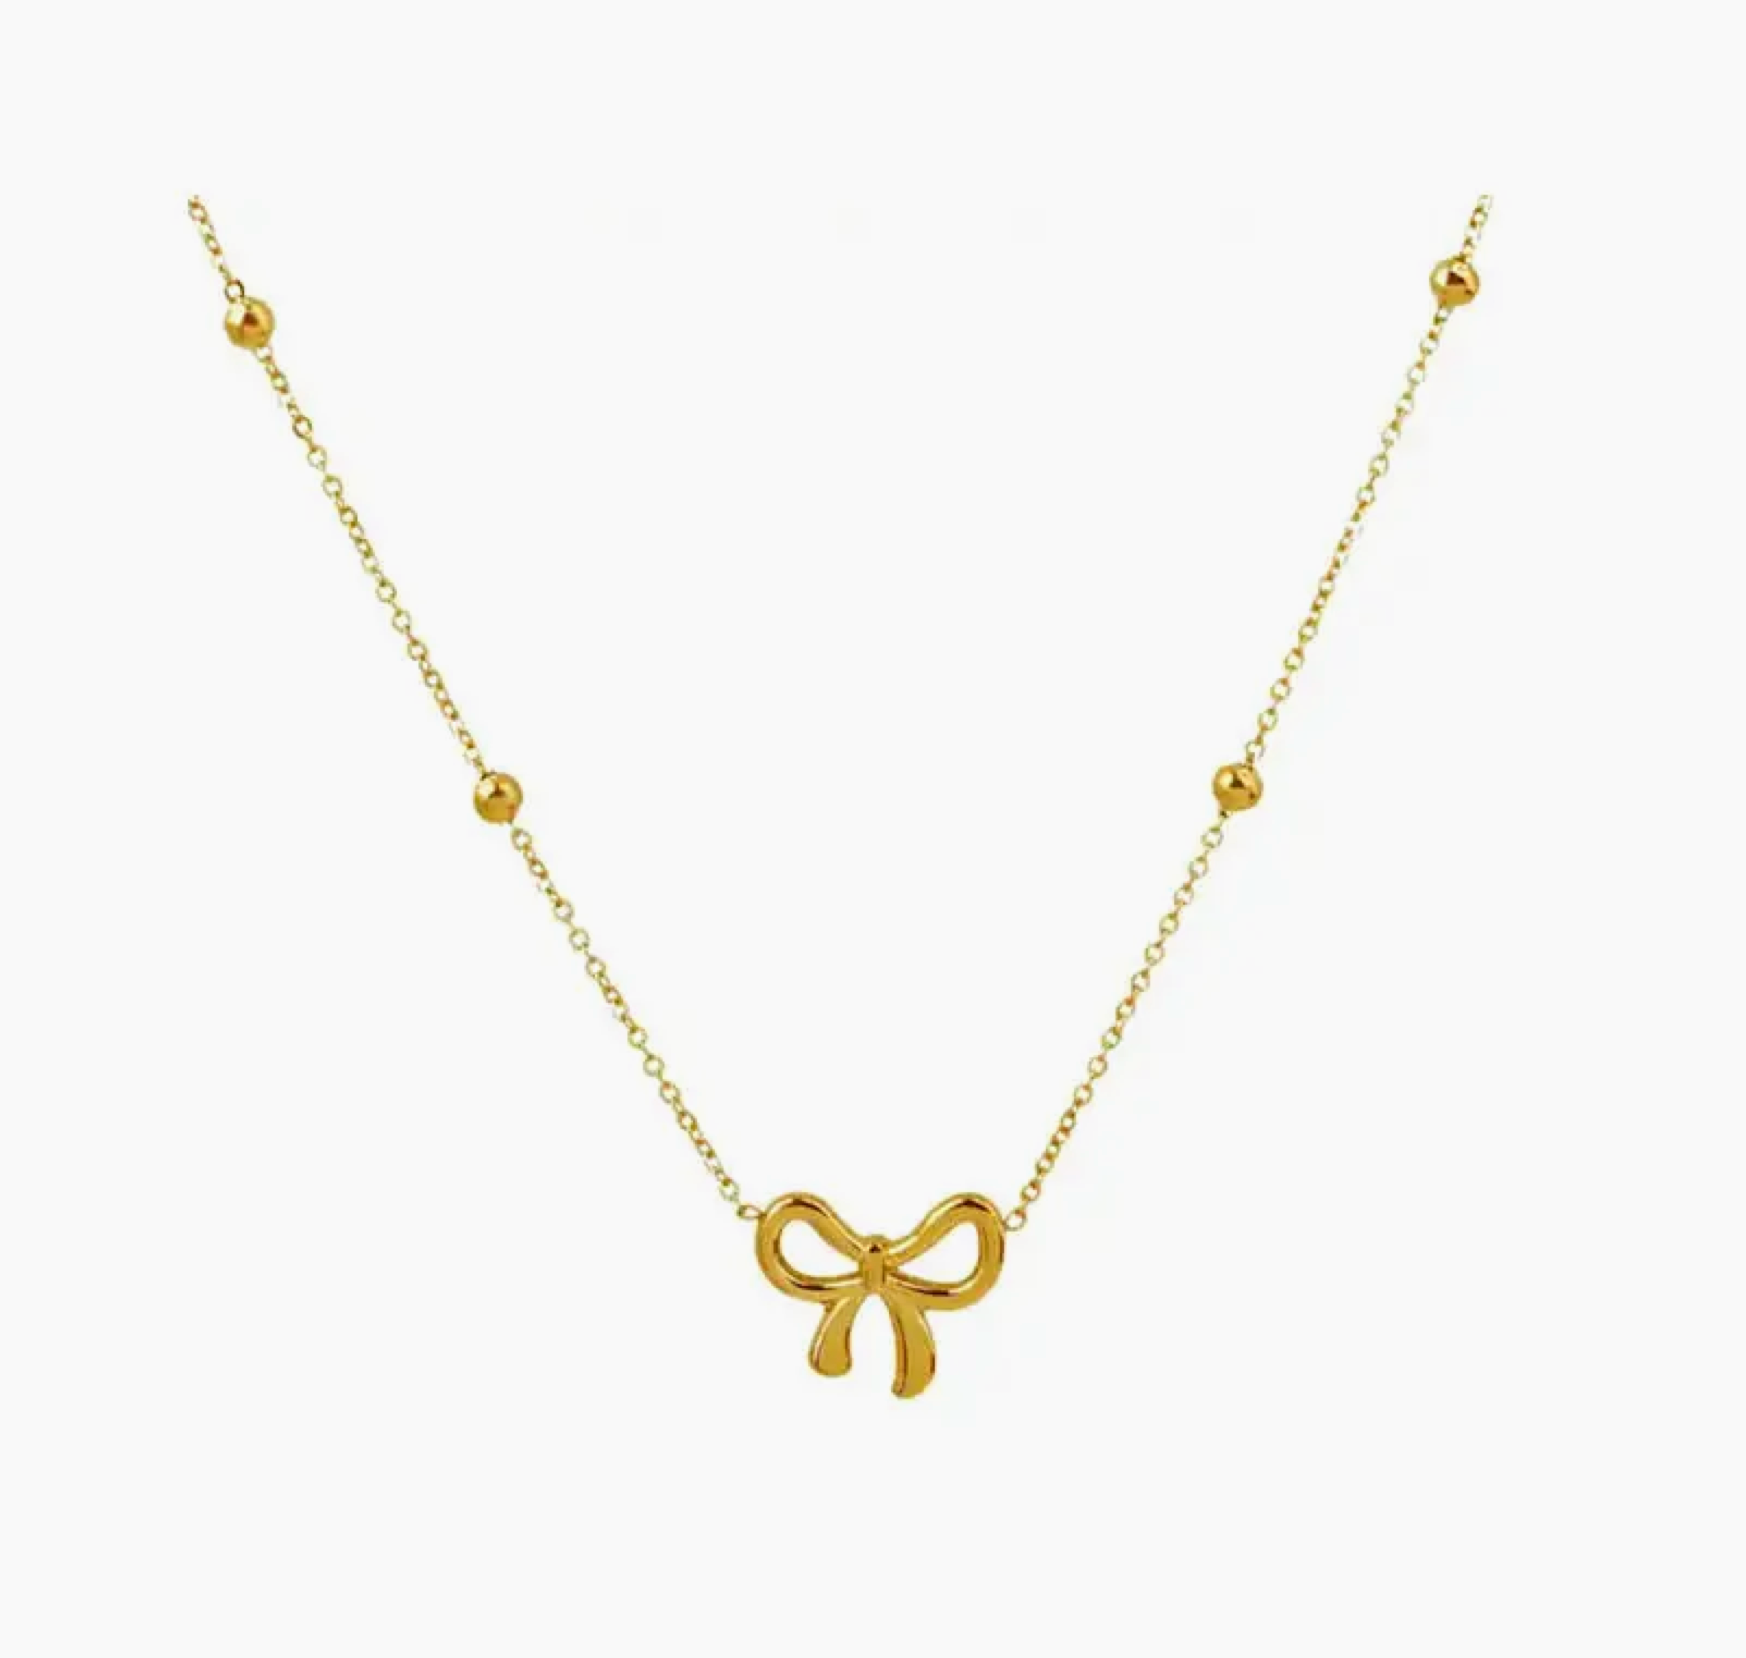 Darling Bow Necklace